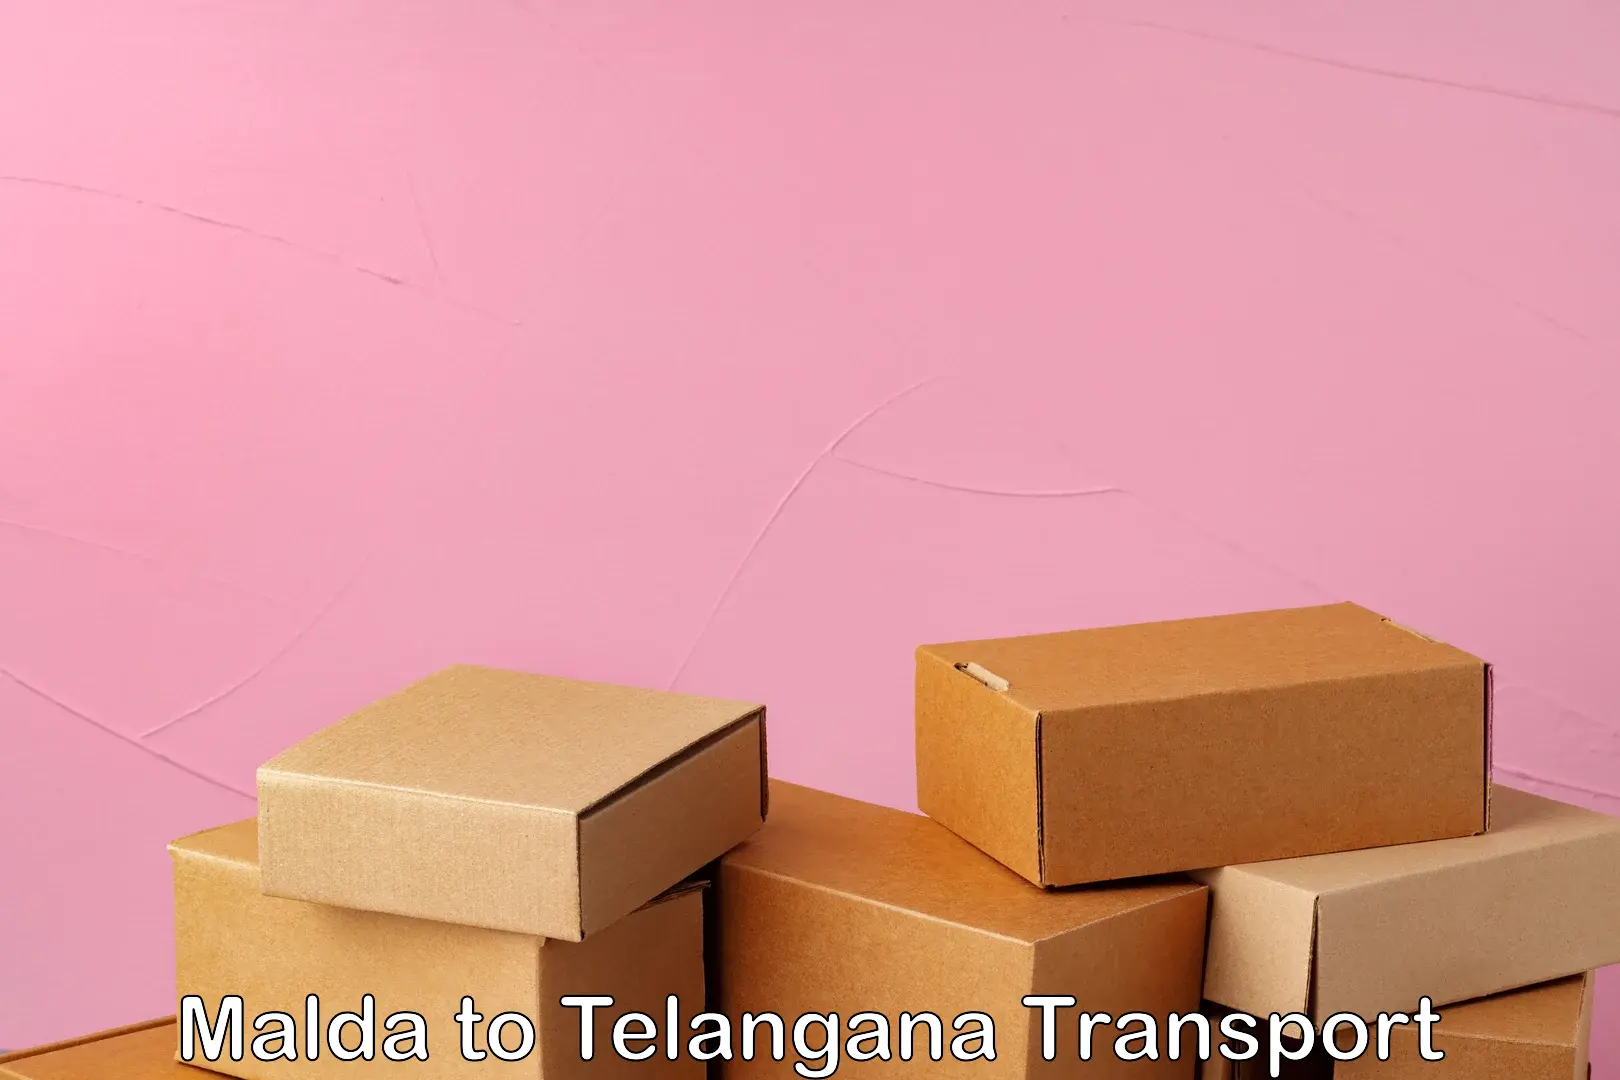 Air freight transport services in Malda to Mahadevpur